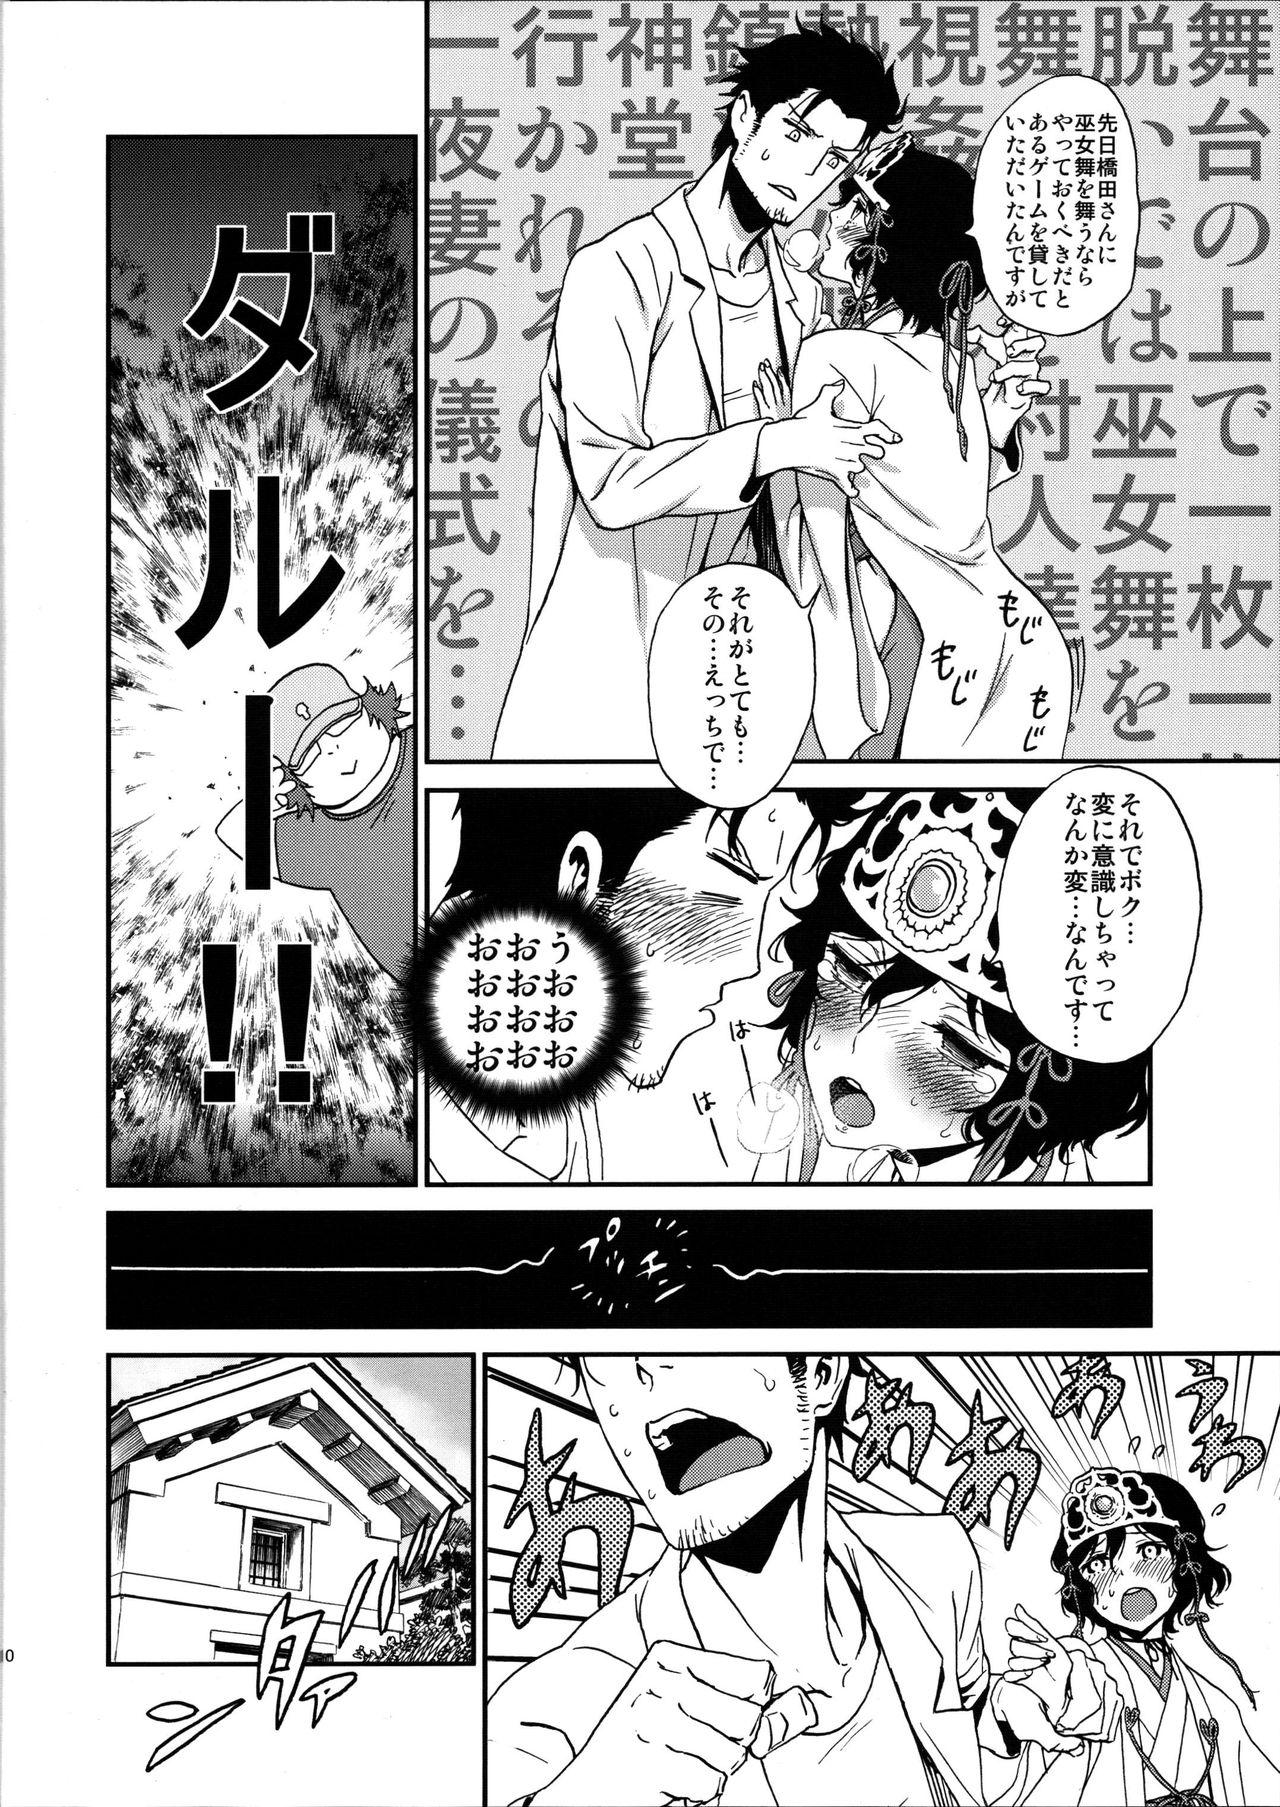 Missionary Yaotome no Chrysanthemum - Steinsgate Ethnic - Page 9